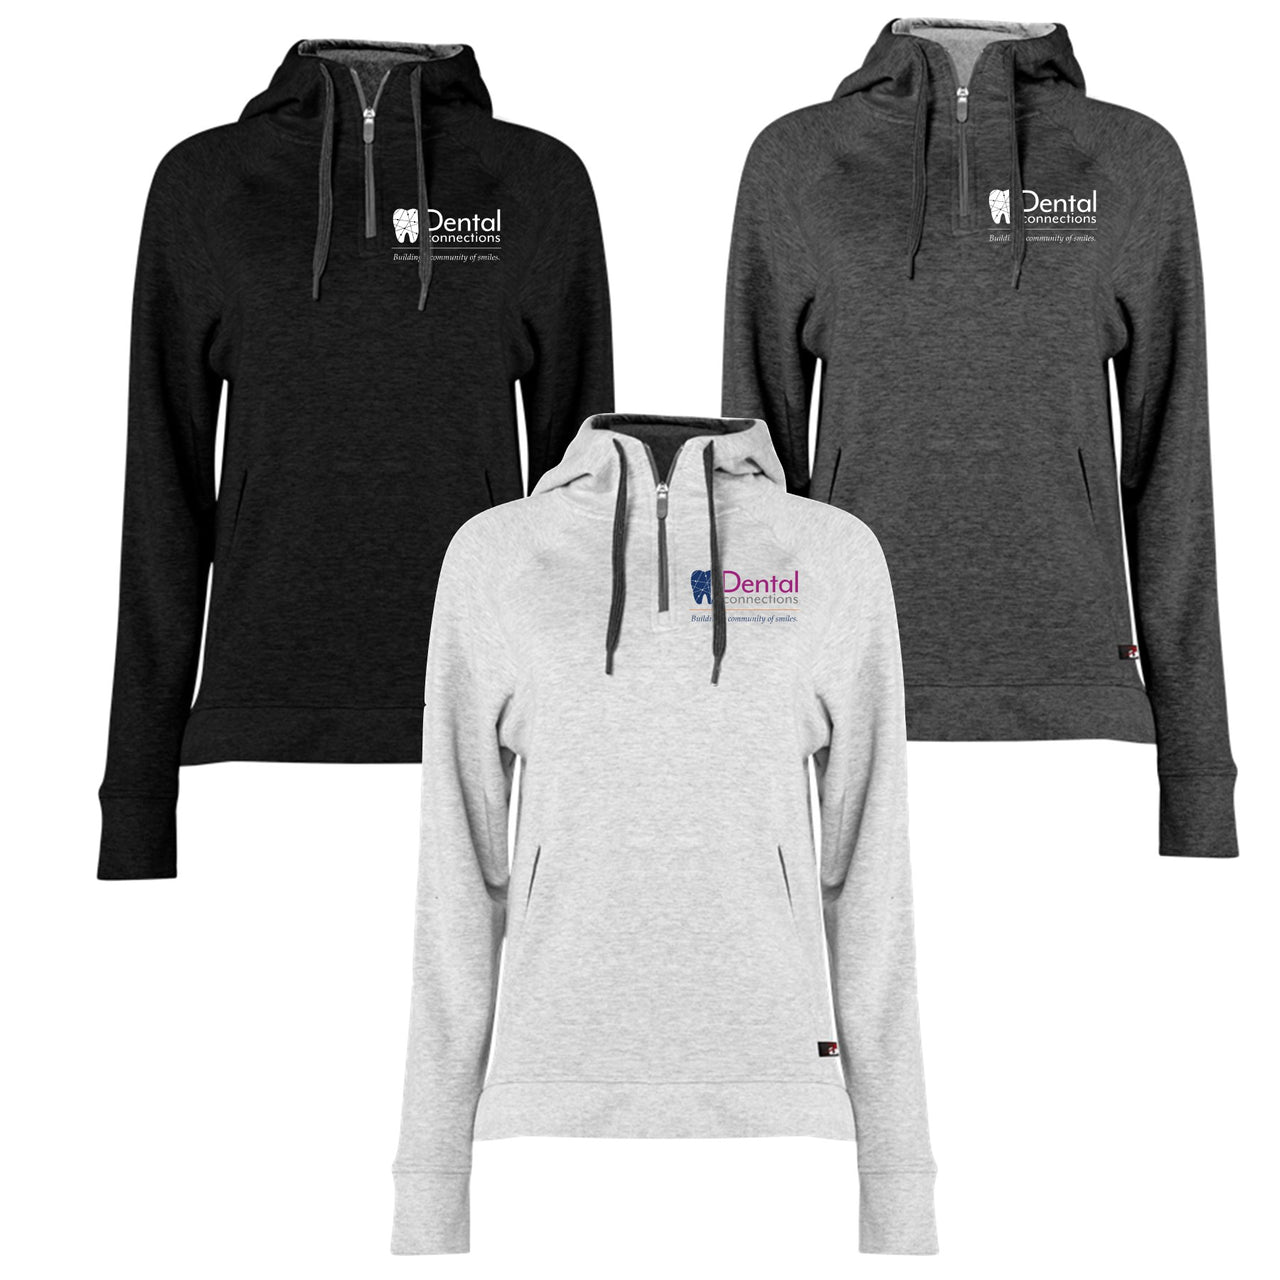 Ladies - Badger FitFlex Women's French Terry Hooded Quarter-Zip- (Dental Connections)